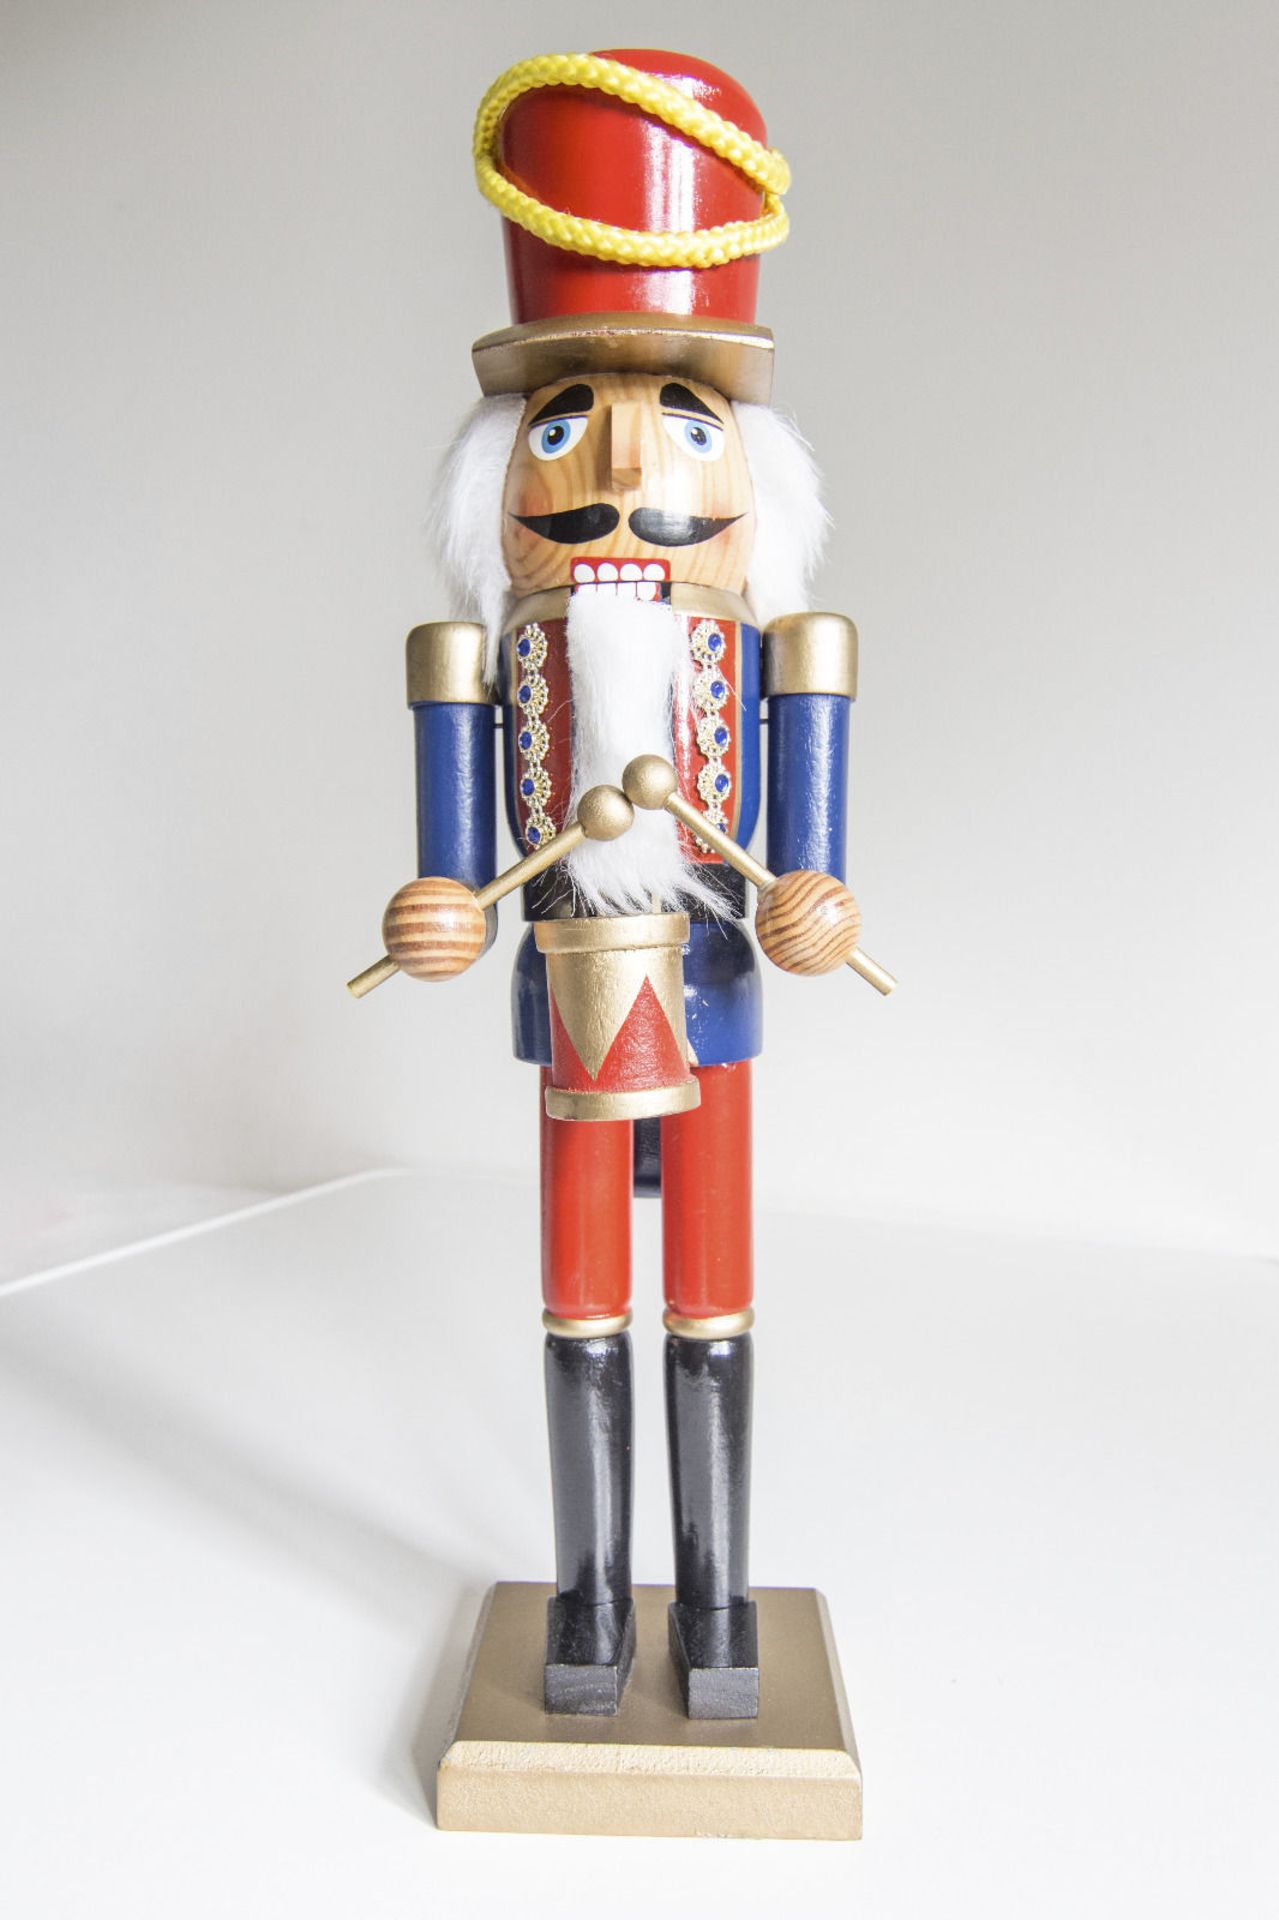 V Brand New Large wooden hand painted soldier nut-cracker/ornament - 24" tall - Image 2 of 2